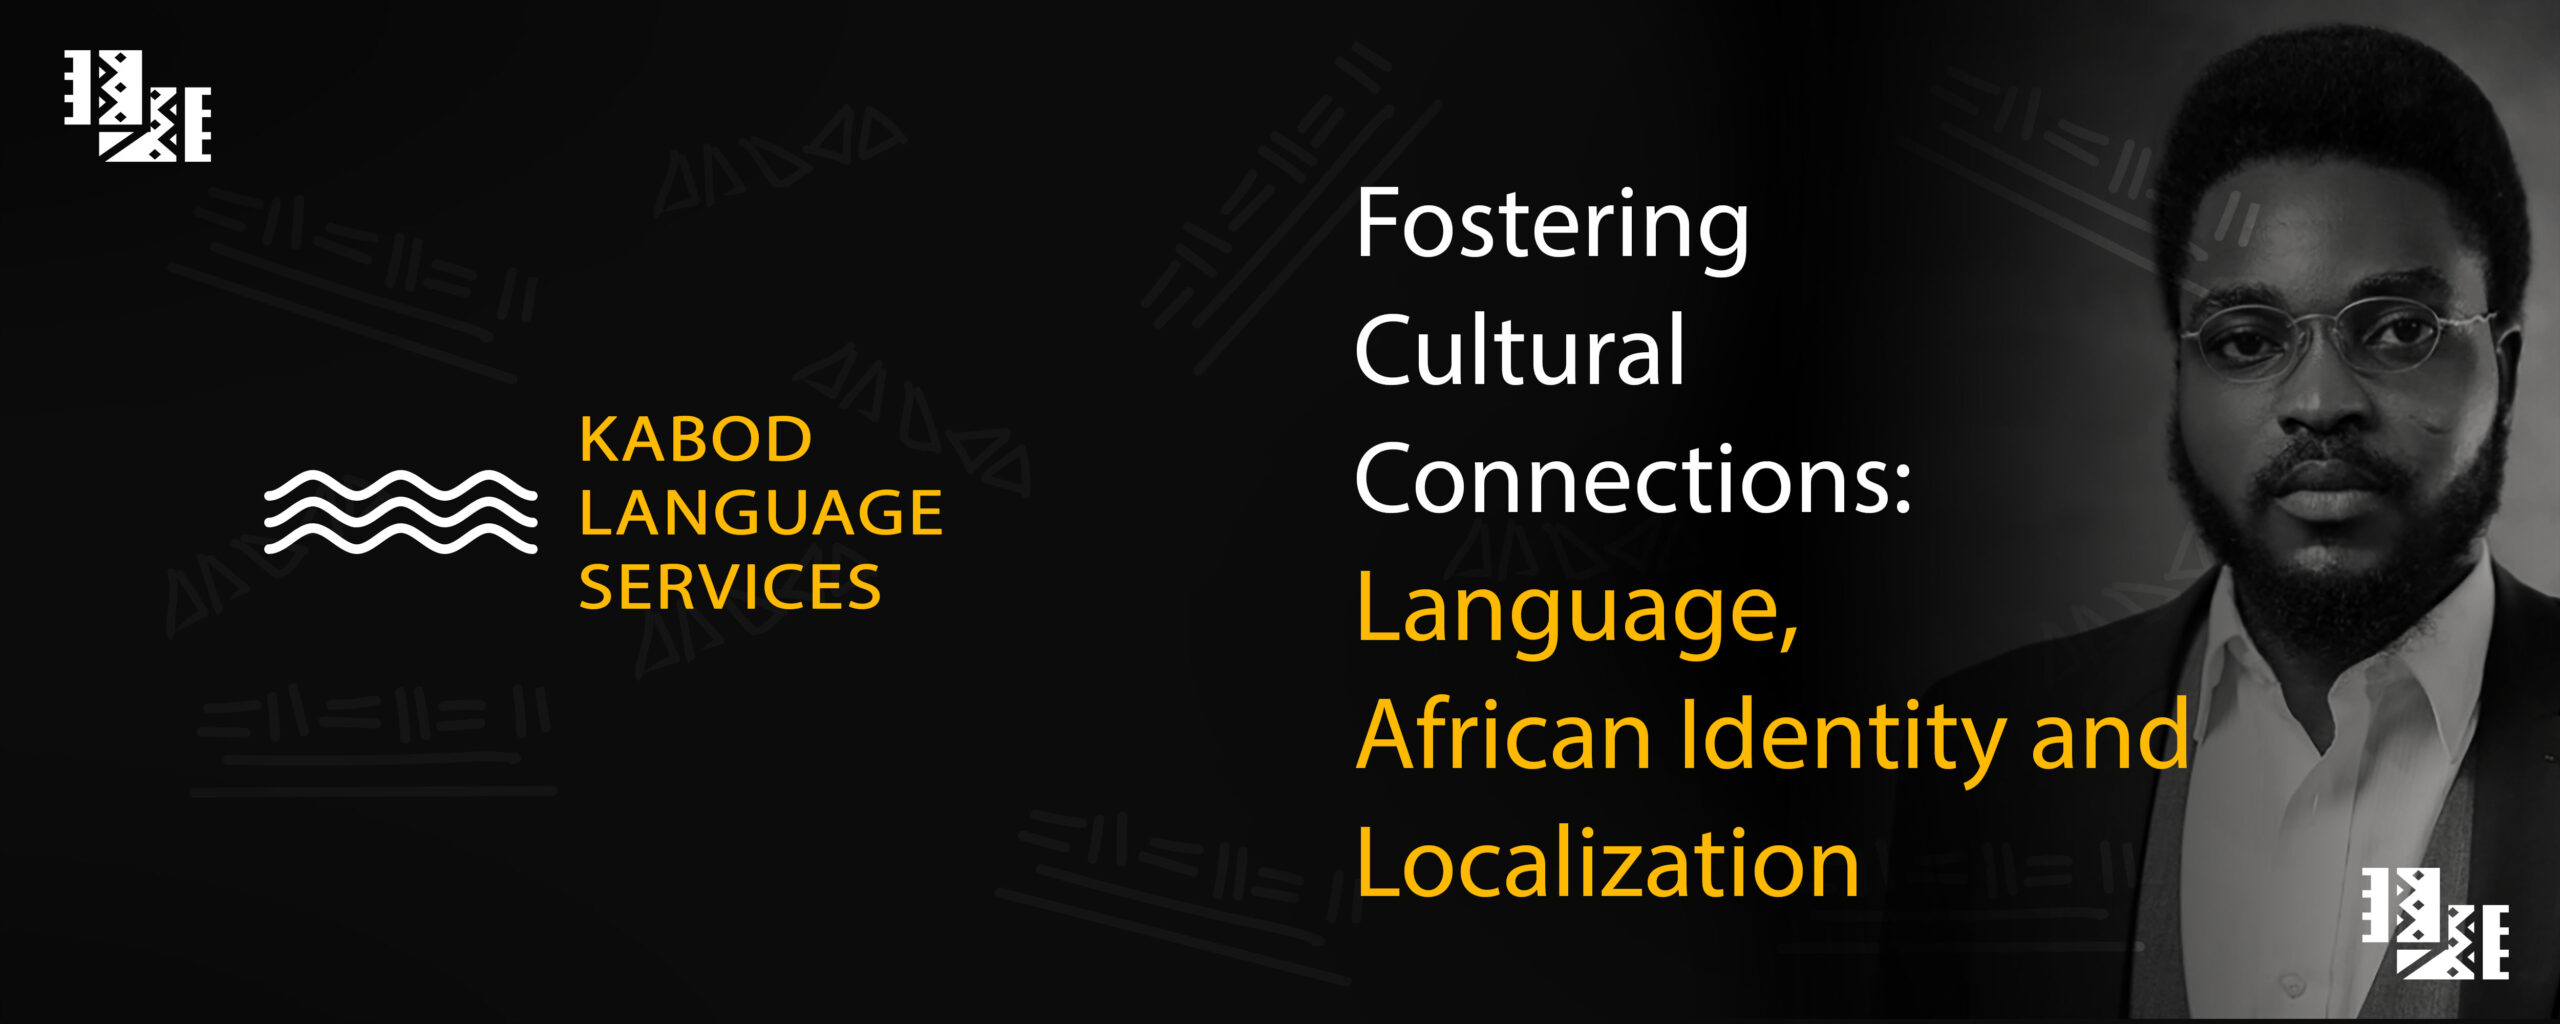 Fostering Cultural Connections: Language, African Identity and Localization